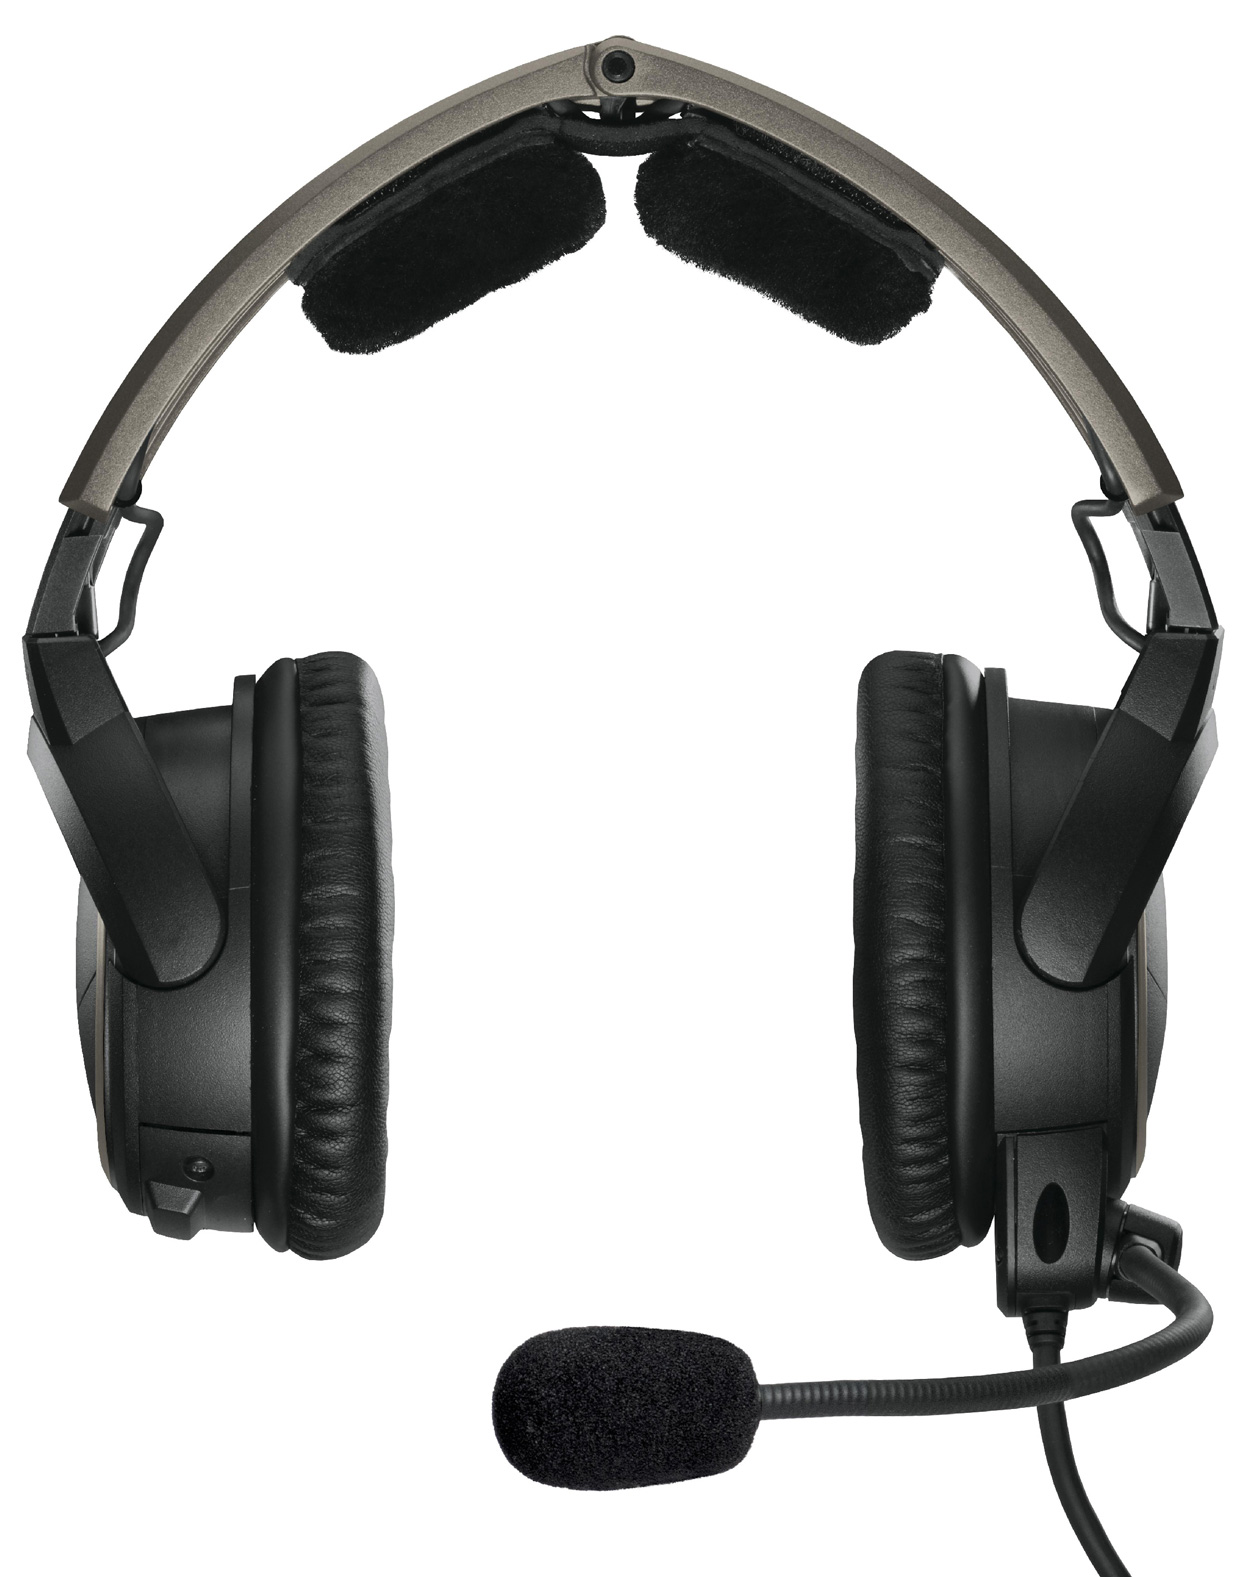 Bose A20 Headset with Lemo 6 pin Plug, Non-Bluetooth, Low Impedance (324843-2140) - Bose